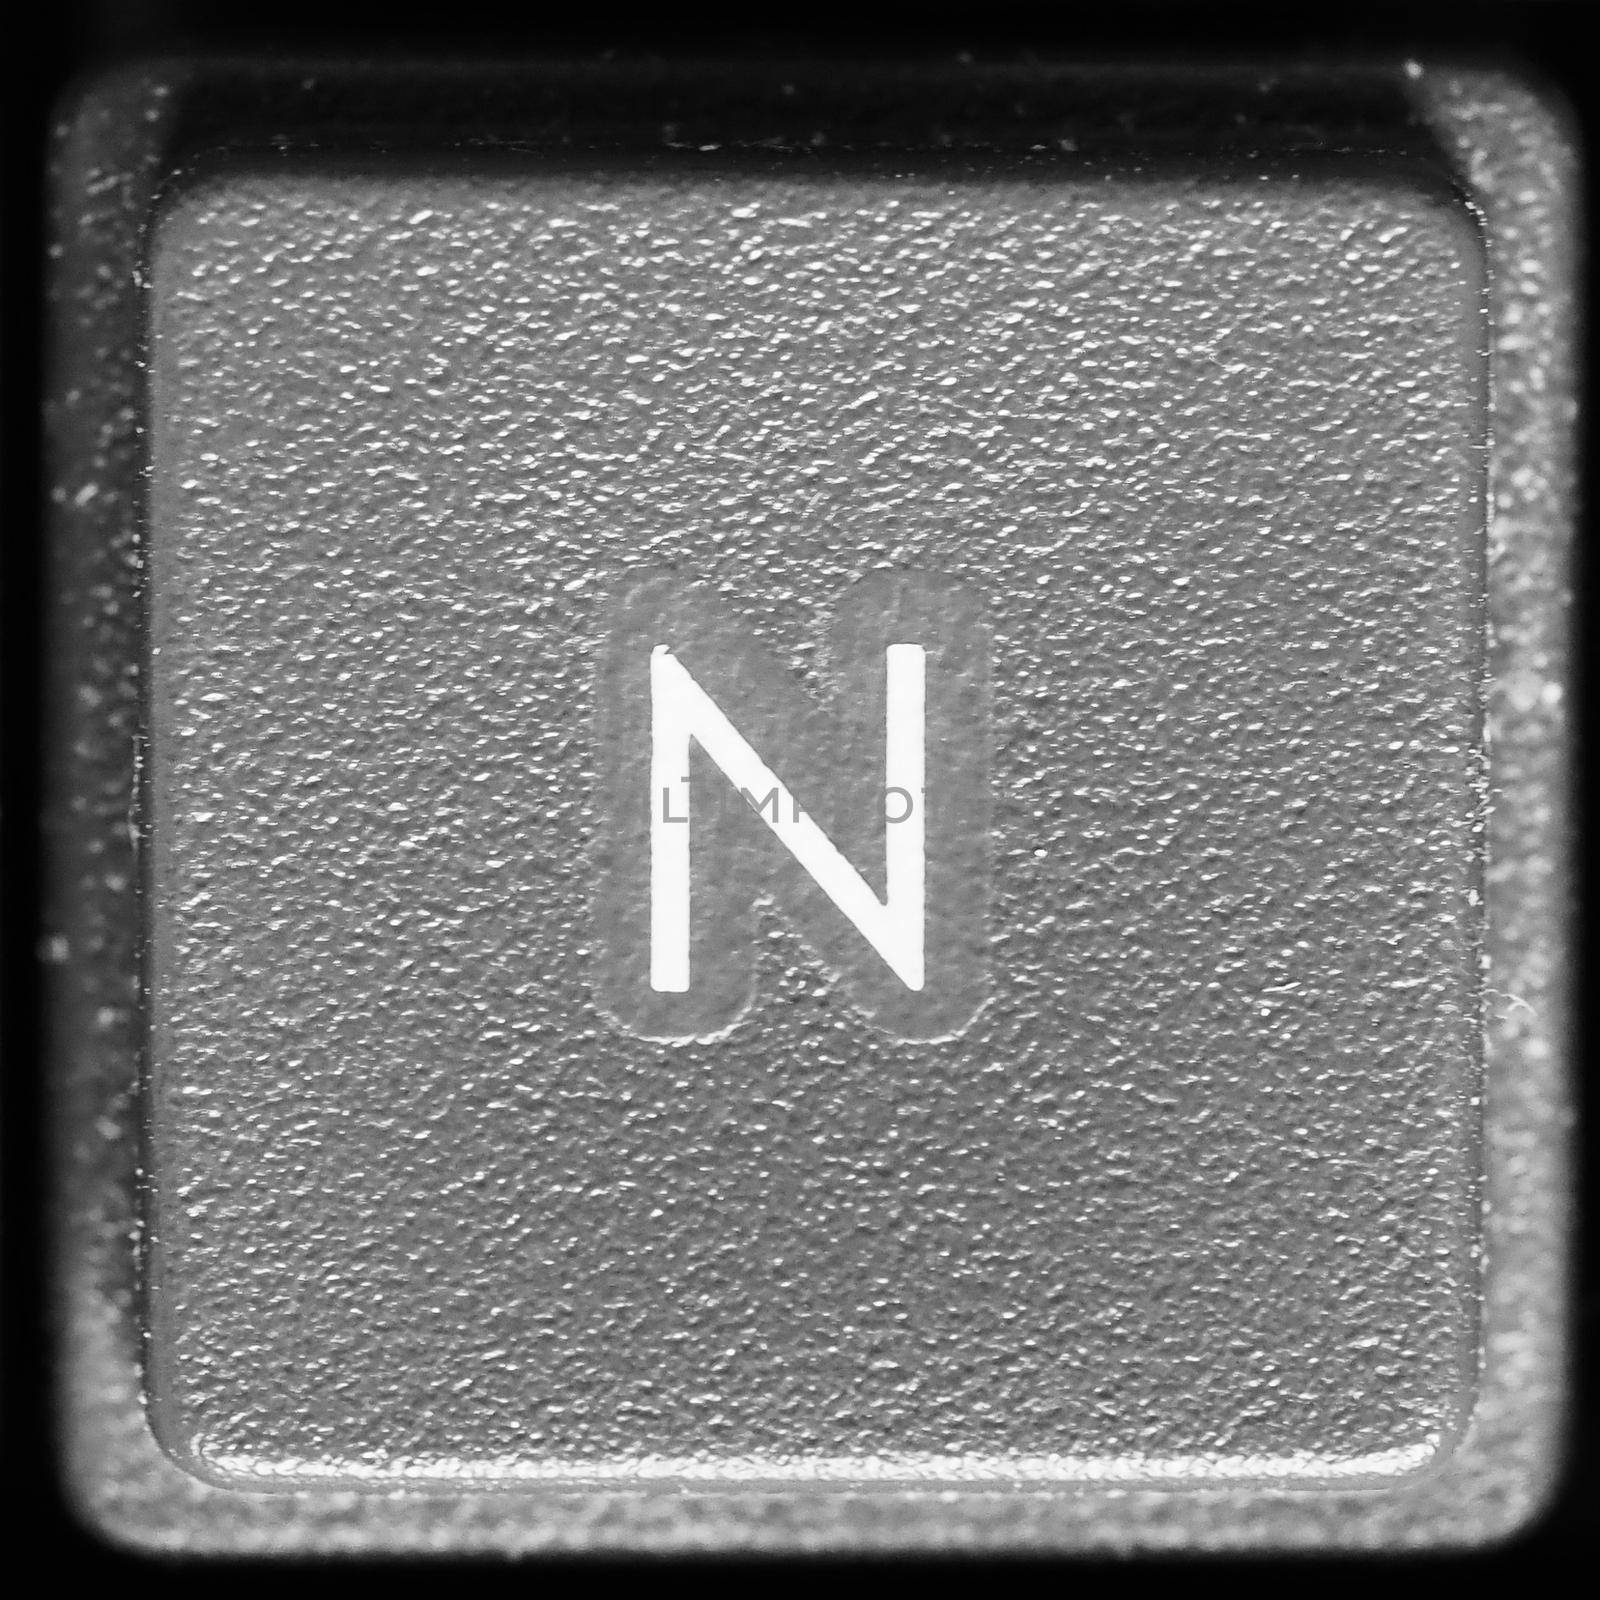 Letter N on computer keyboard by claudiodivizia